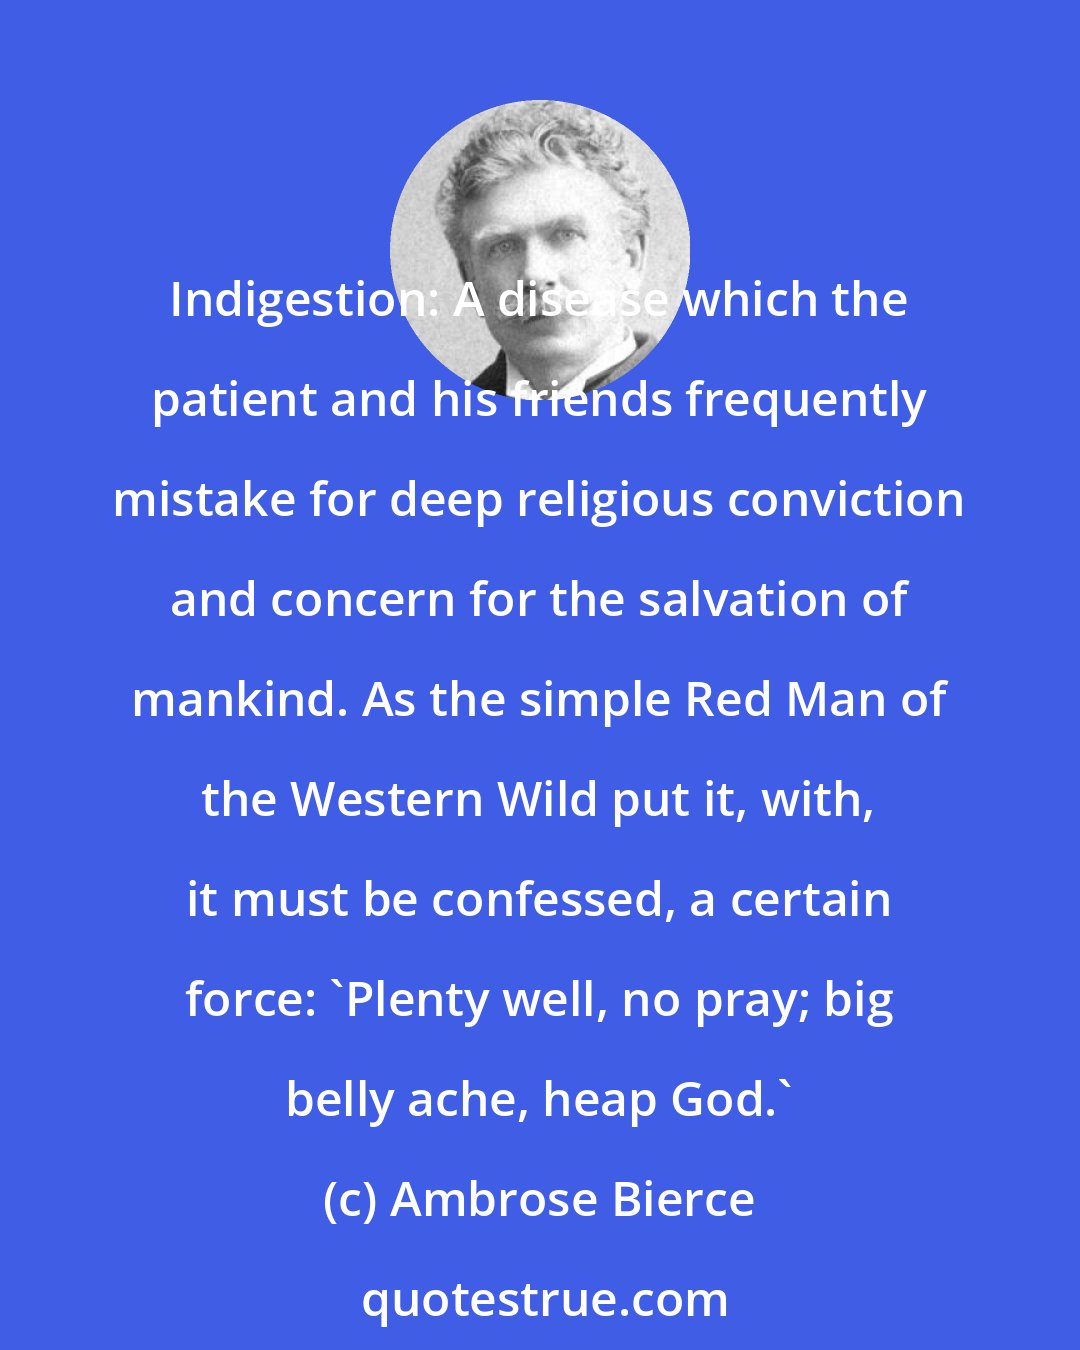 Ambrose Bierce: Indigestion: A disease which the patient and his friends frequently mistake for deep religious conviction and concern for the salvation of mankind. As the simple Red Man of the Western Wild put it, with, it must be confessed, a certain force: 'Plenty well, no pray; big belly ache, heap God.'